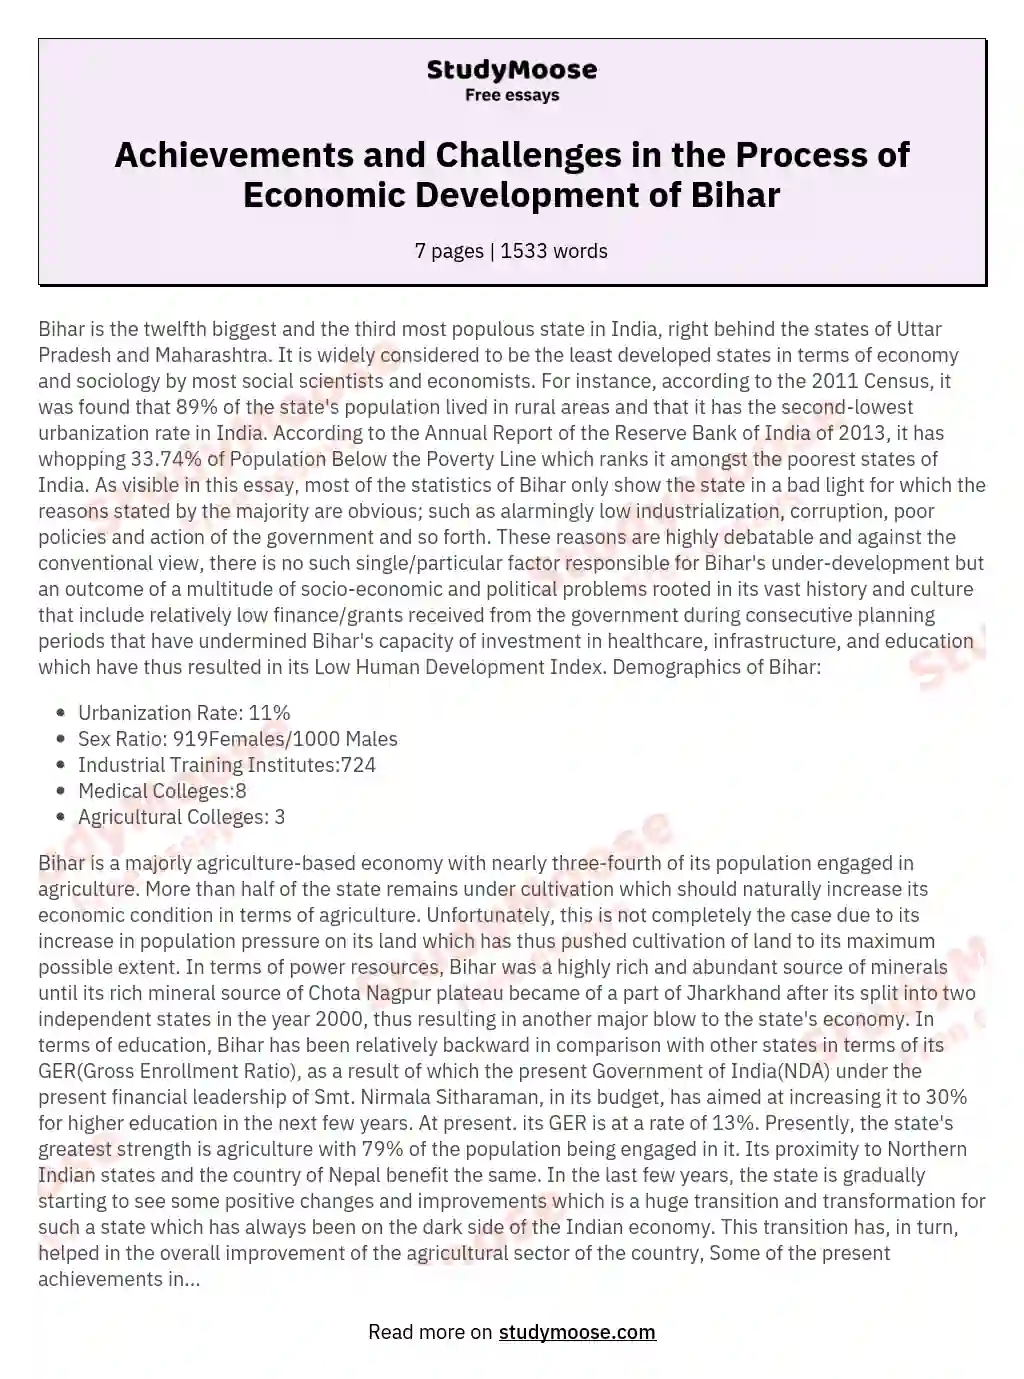 Achievements and Challenges in the Process of Economic Development of Bihar essay